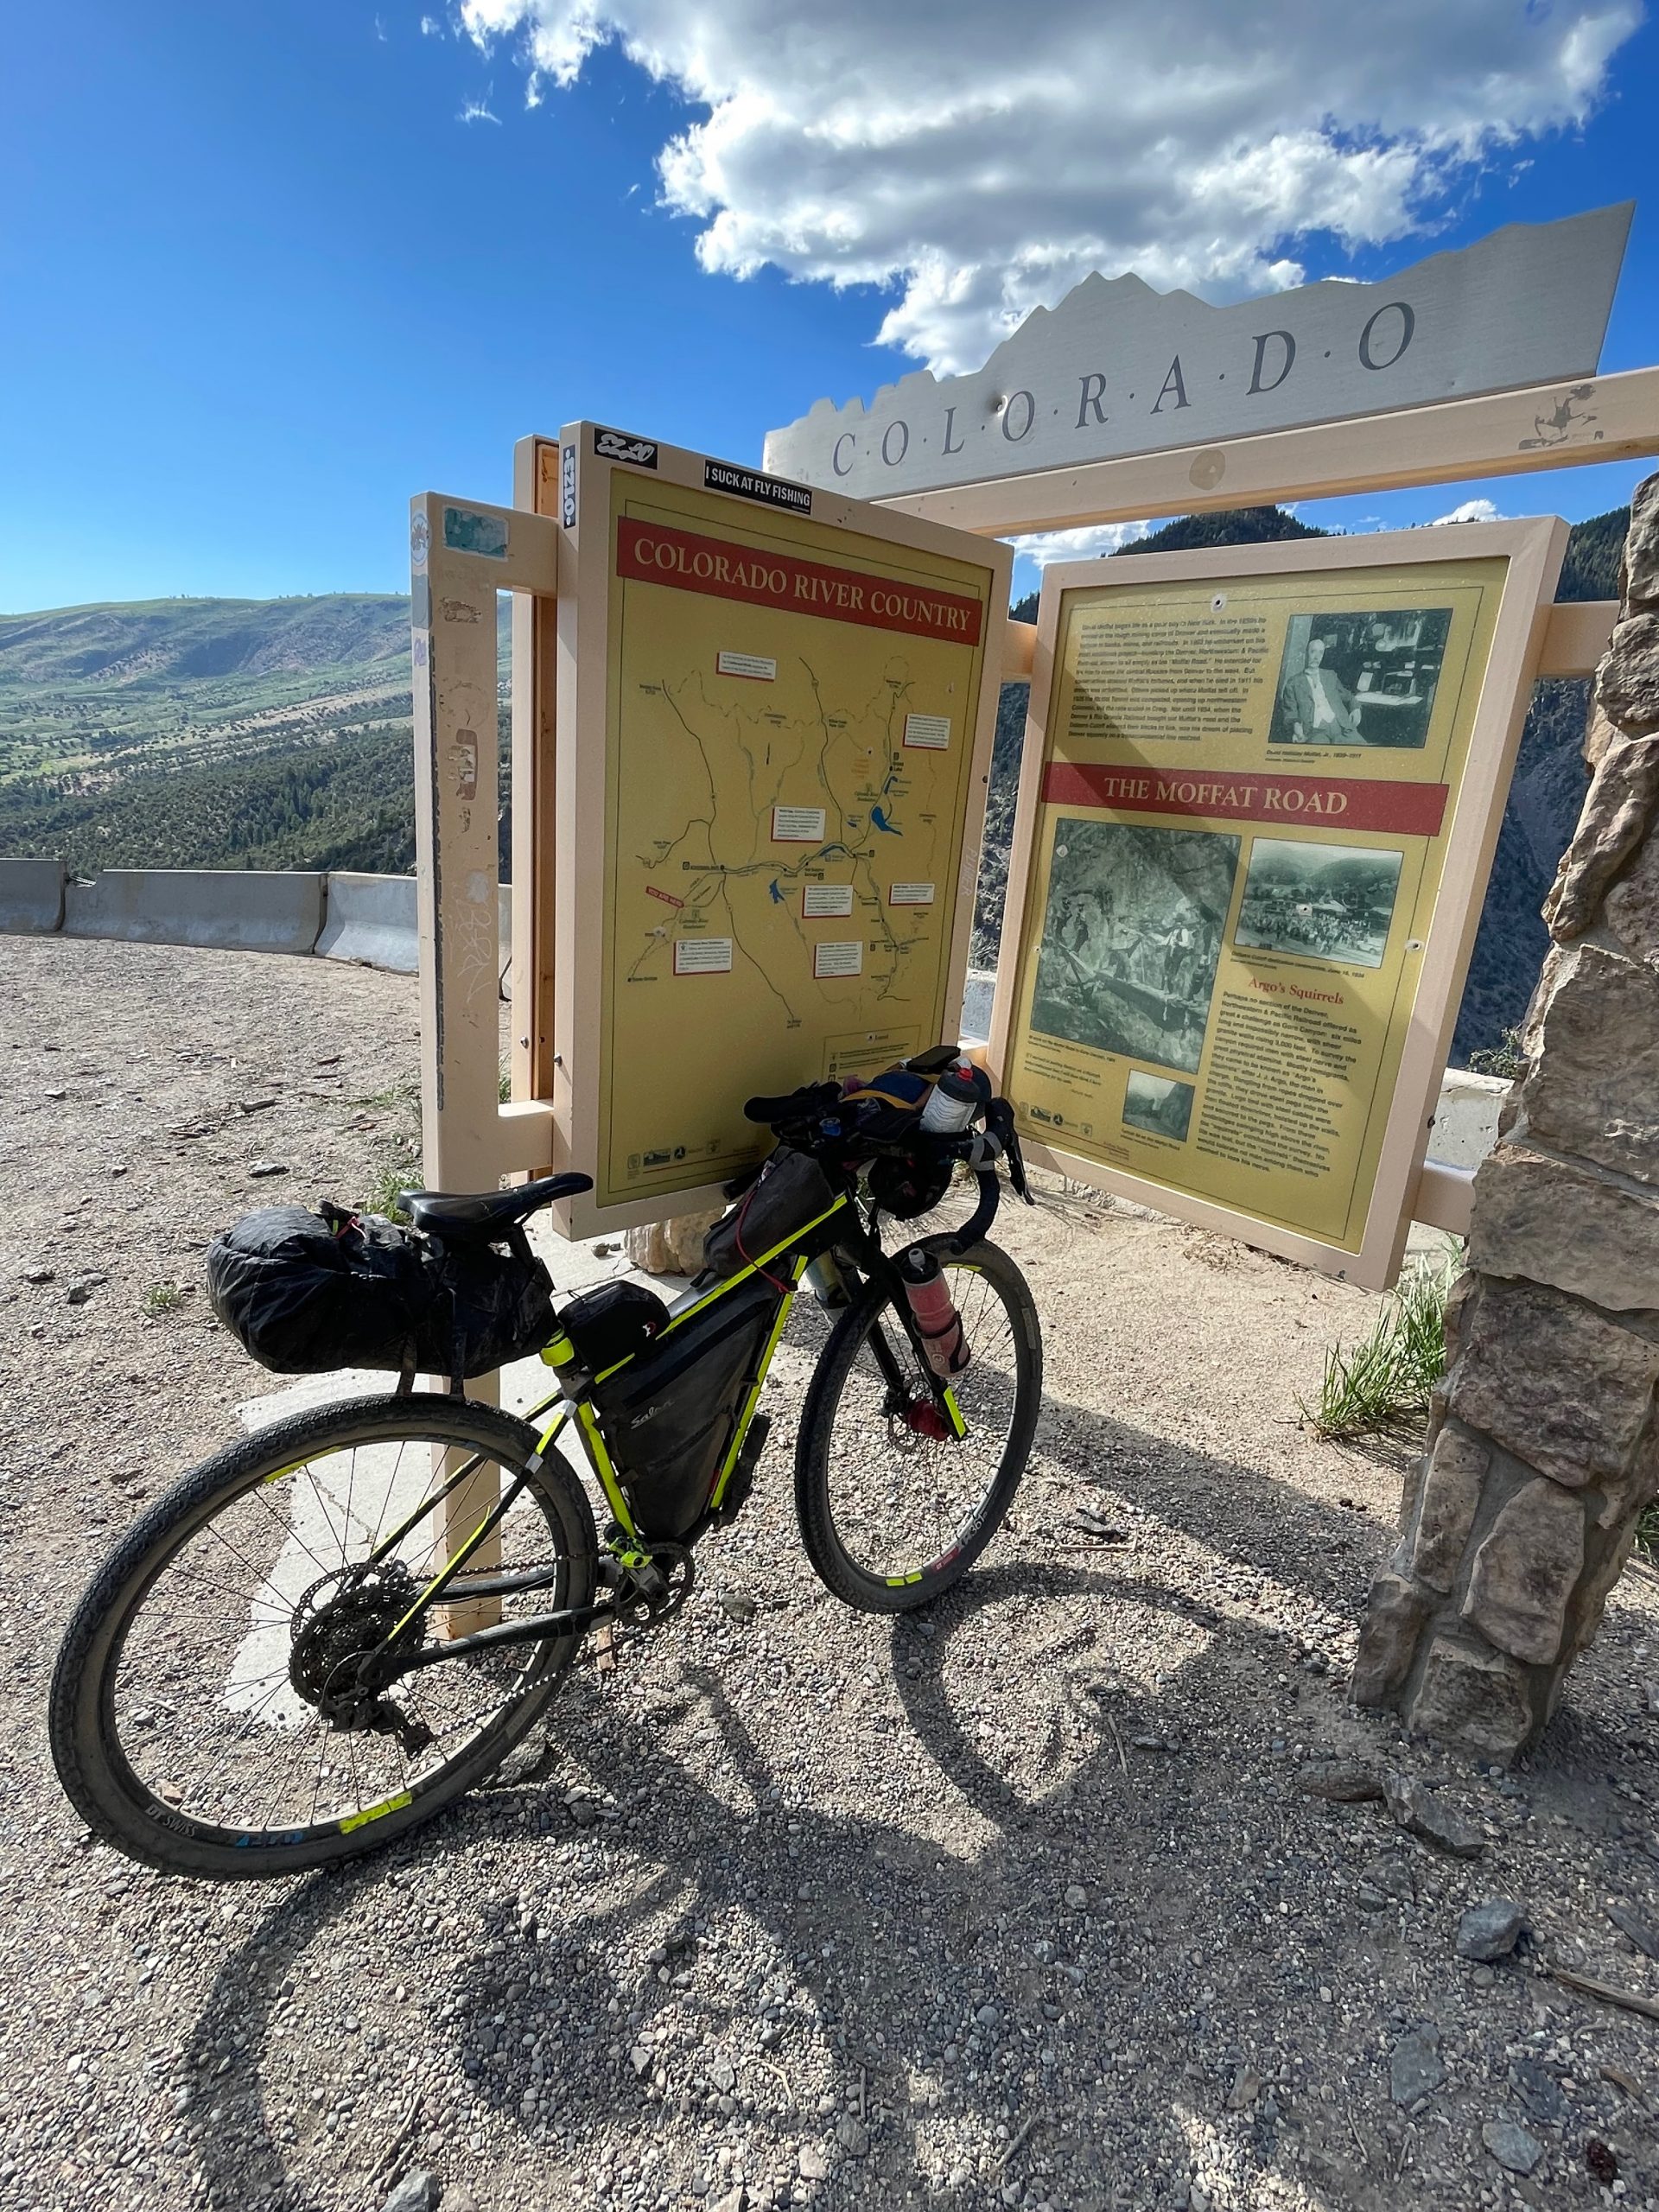 TD 2022 – Day 11 – June 21st, 2022 – Brush Lodge, CO to Silverthorne, CO via my favorite day of the race